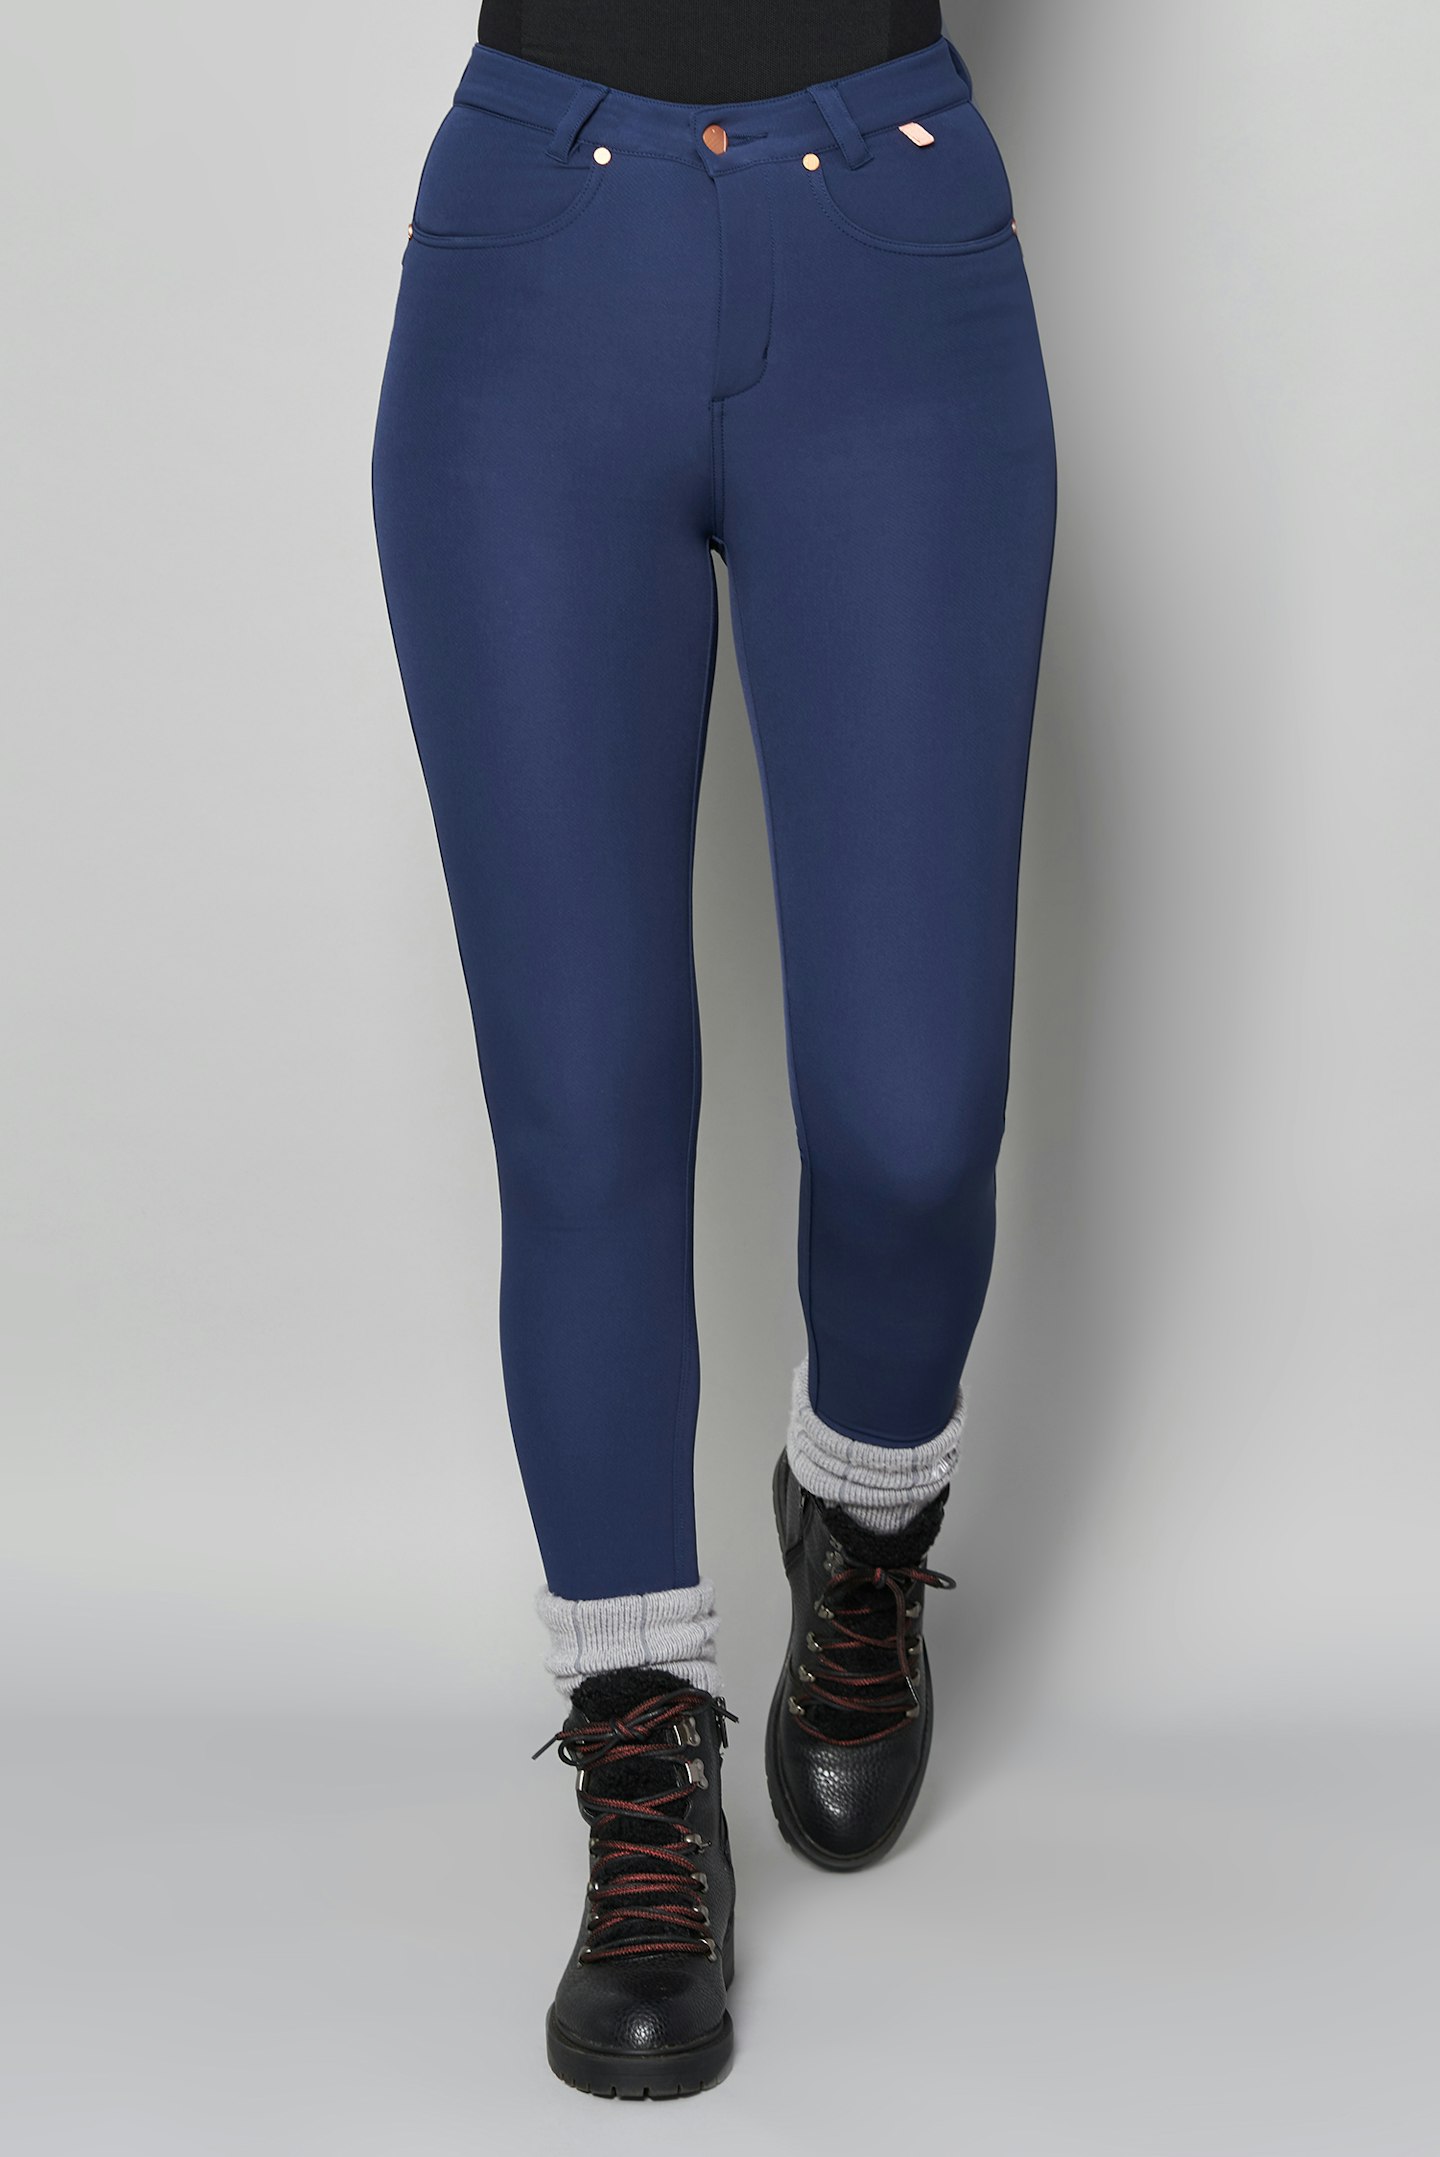 Navy Thermal Skinny Outdoor Trousers, £84